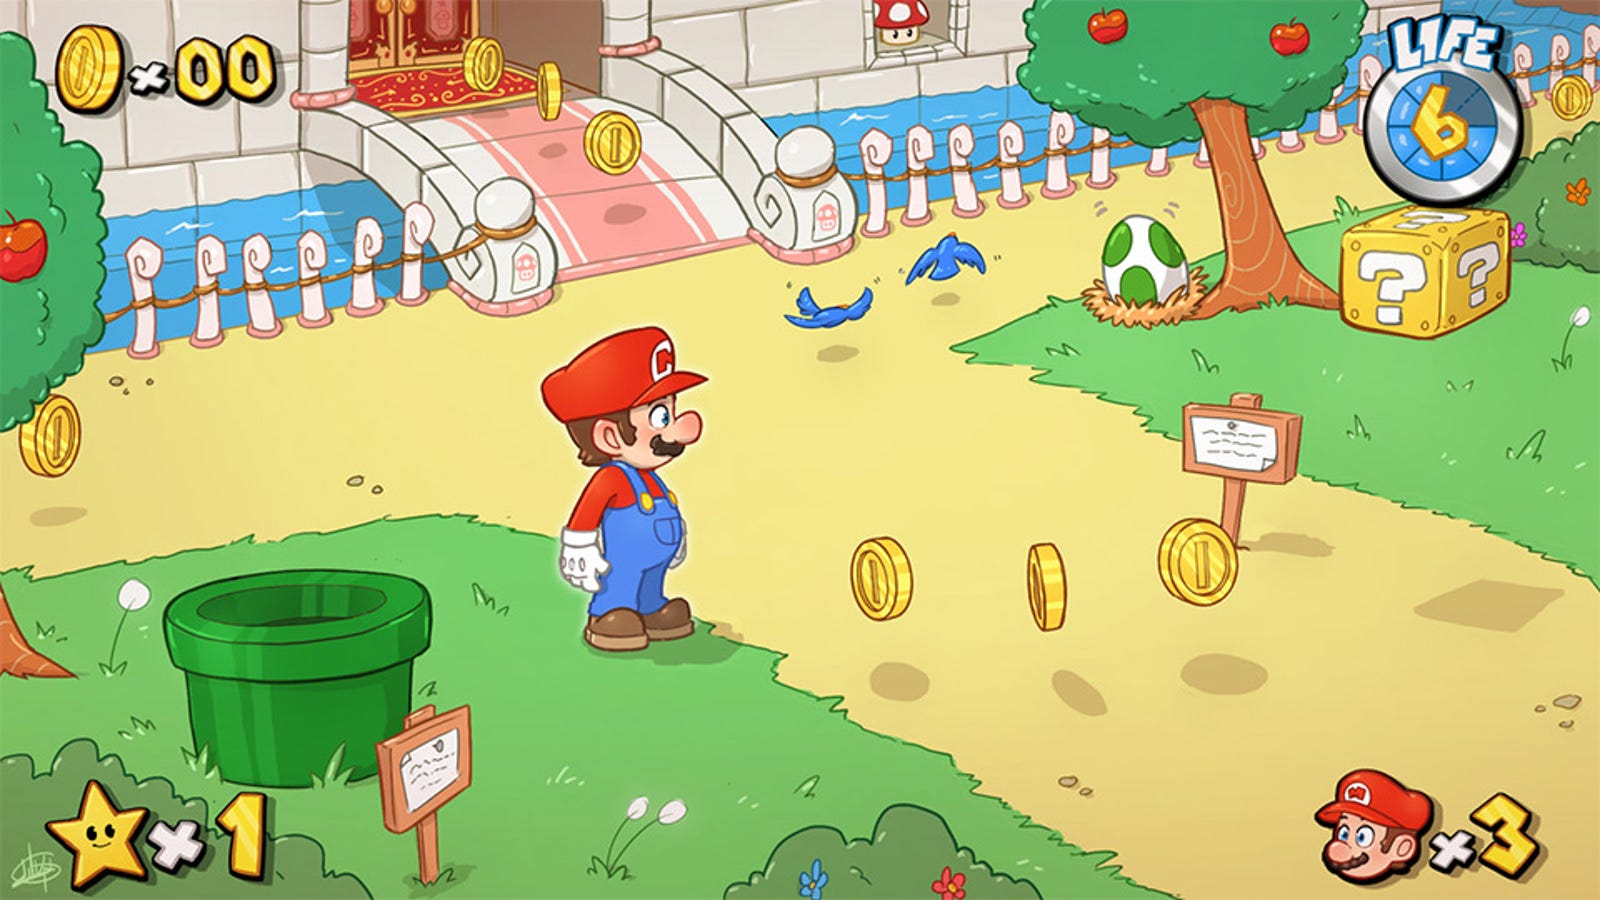 What a New Mario Game Could/Should Look Like